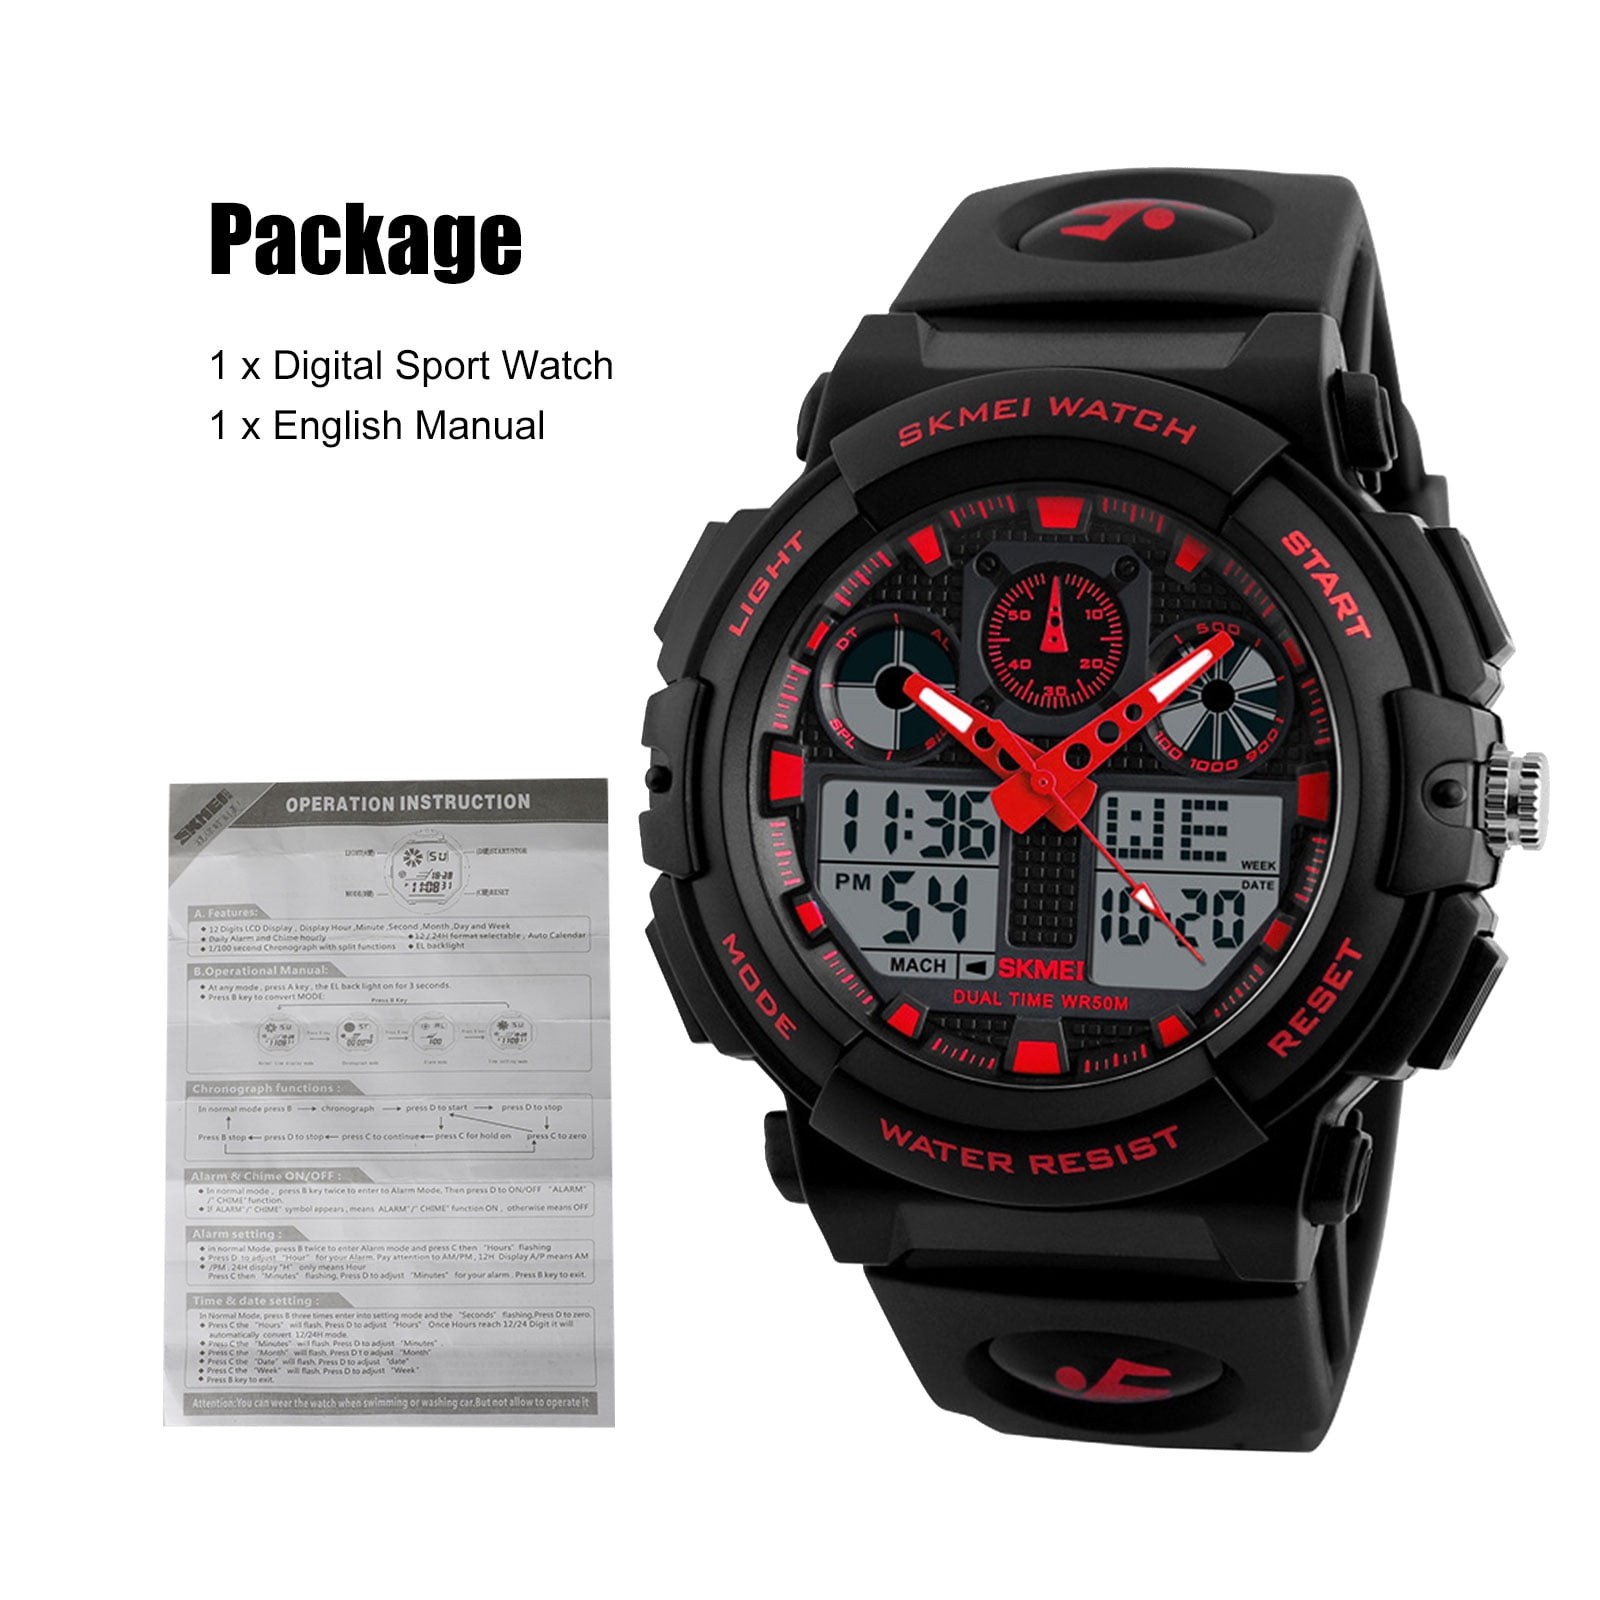 PINIDOUS Mens Watch for Men Digital Sport Watch Gold Watches Waterproof  Watches with 3 Alarms/Countdown/Stopwatch/Digital-Analog/Dual